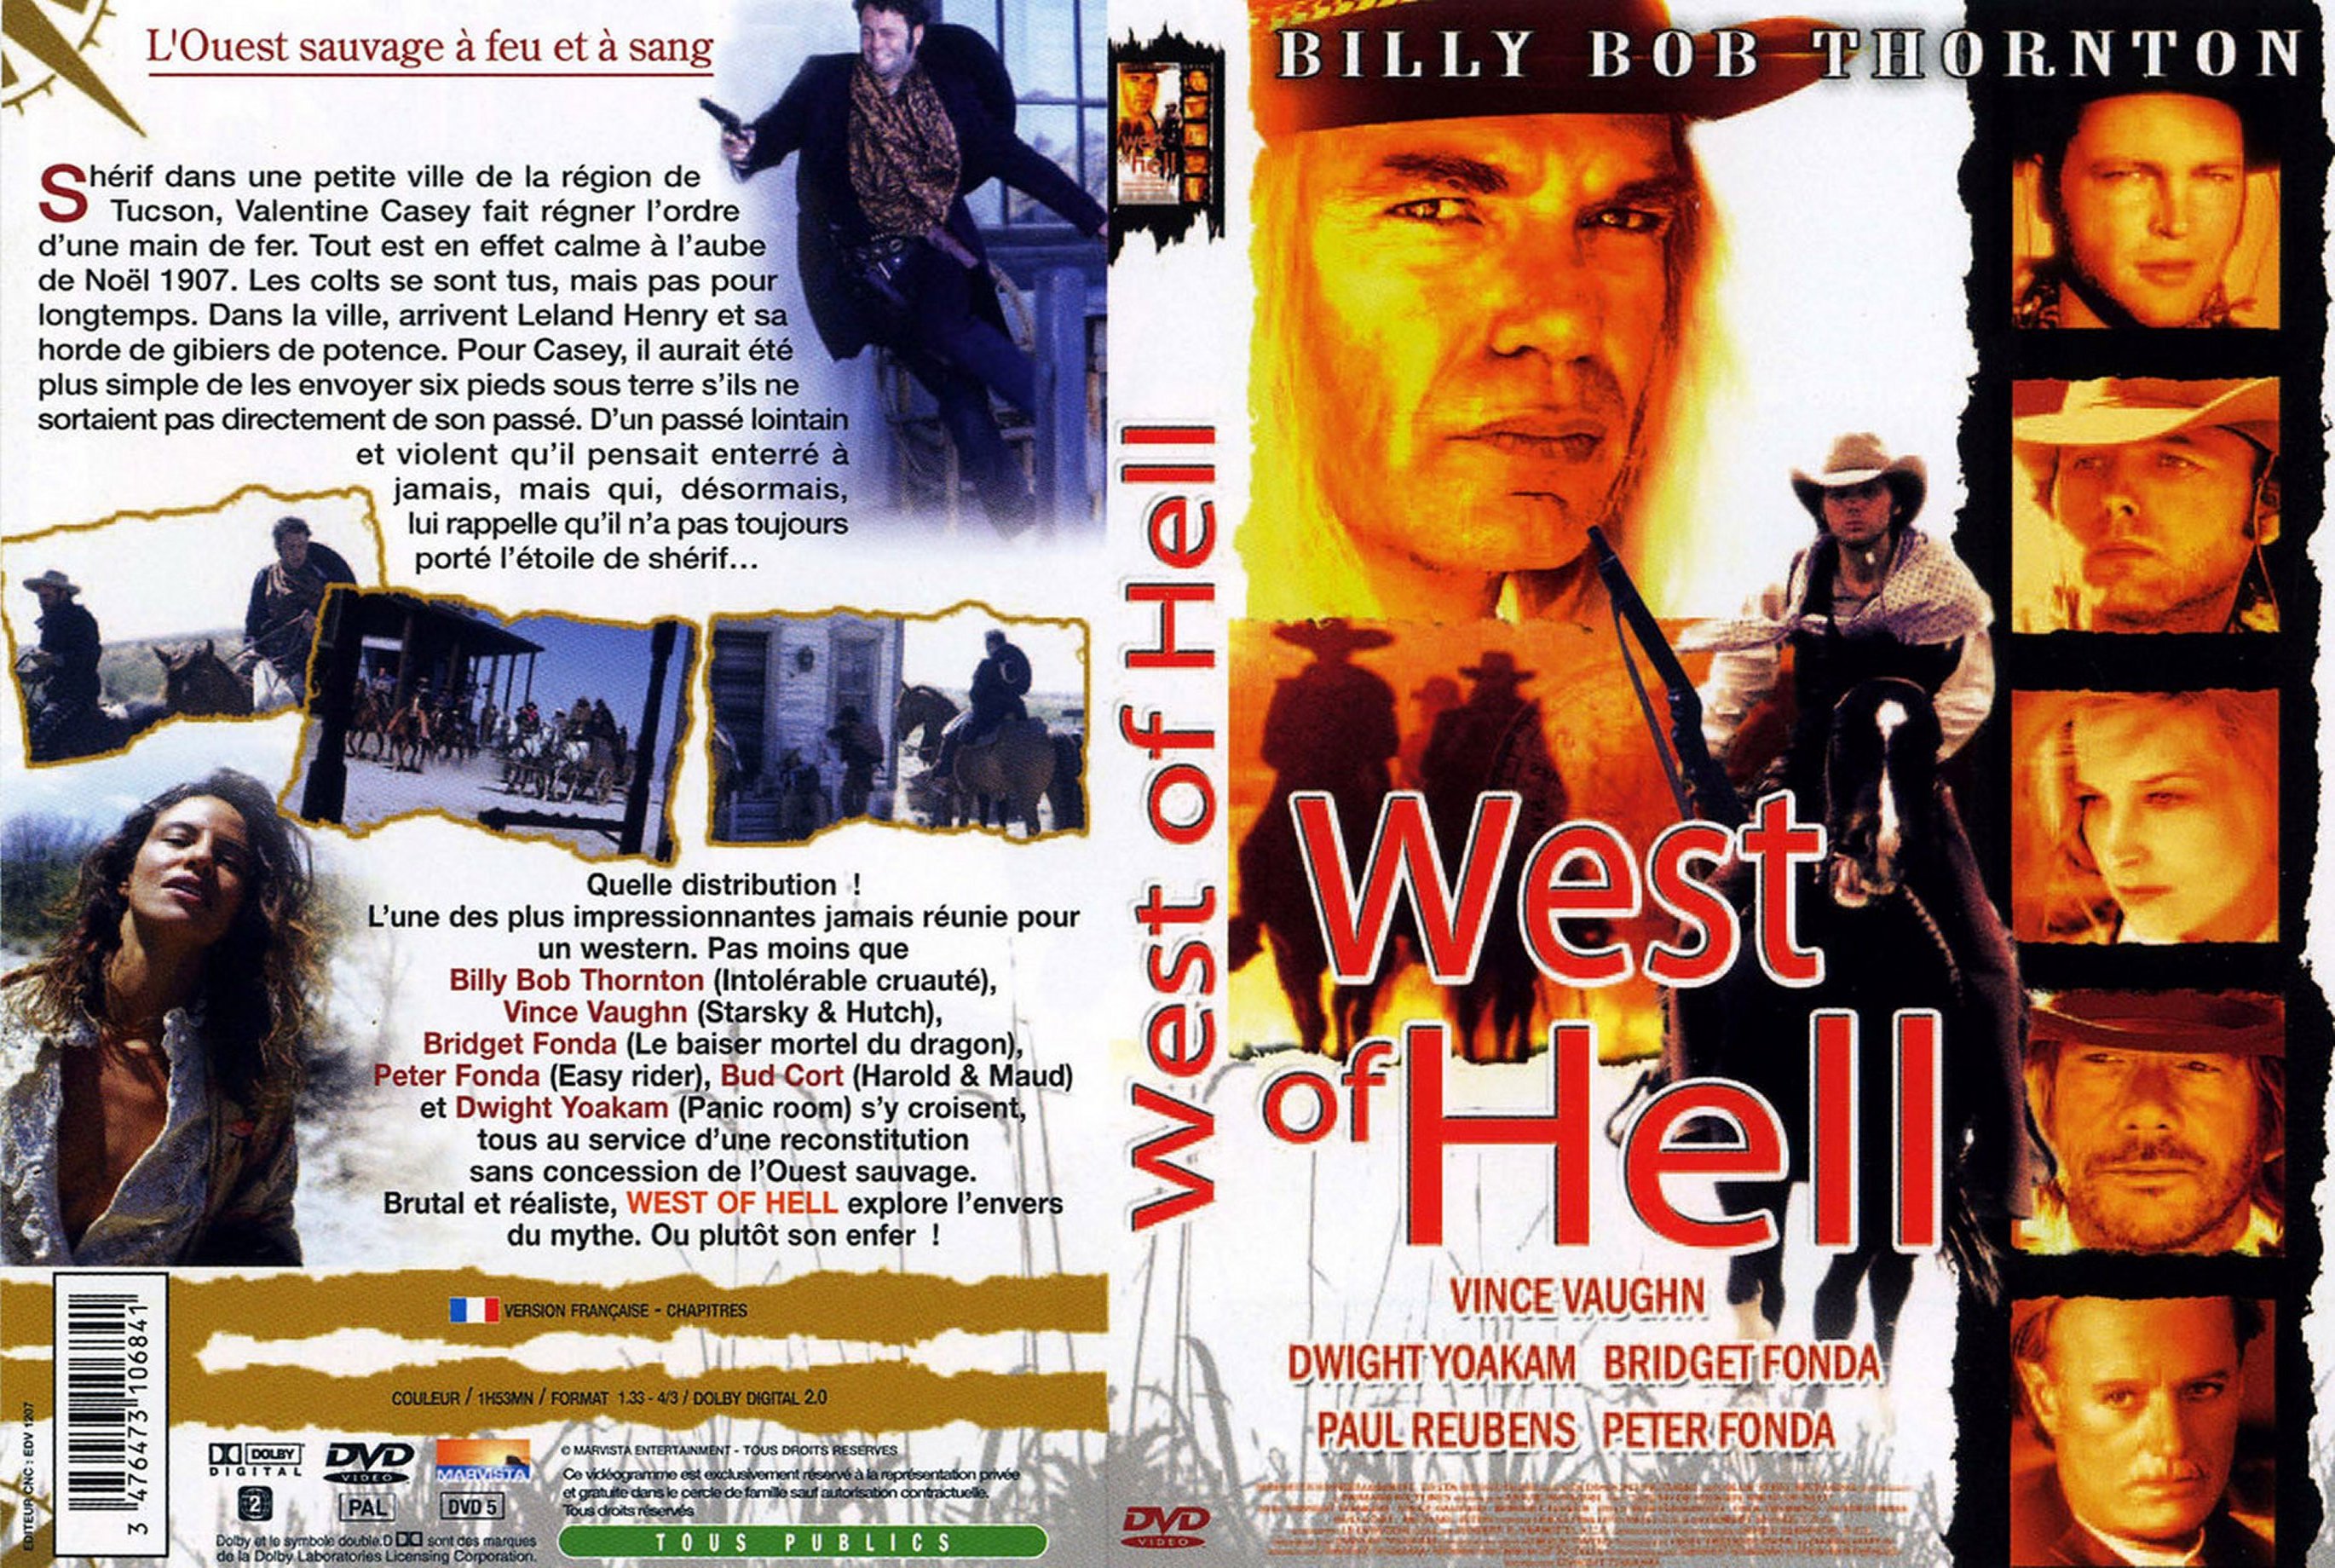 Jaquette DVD West of Hell